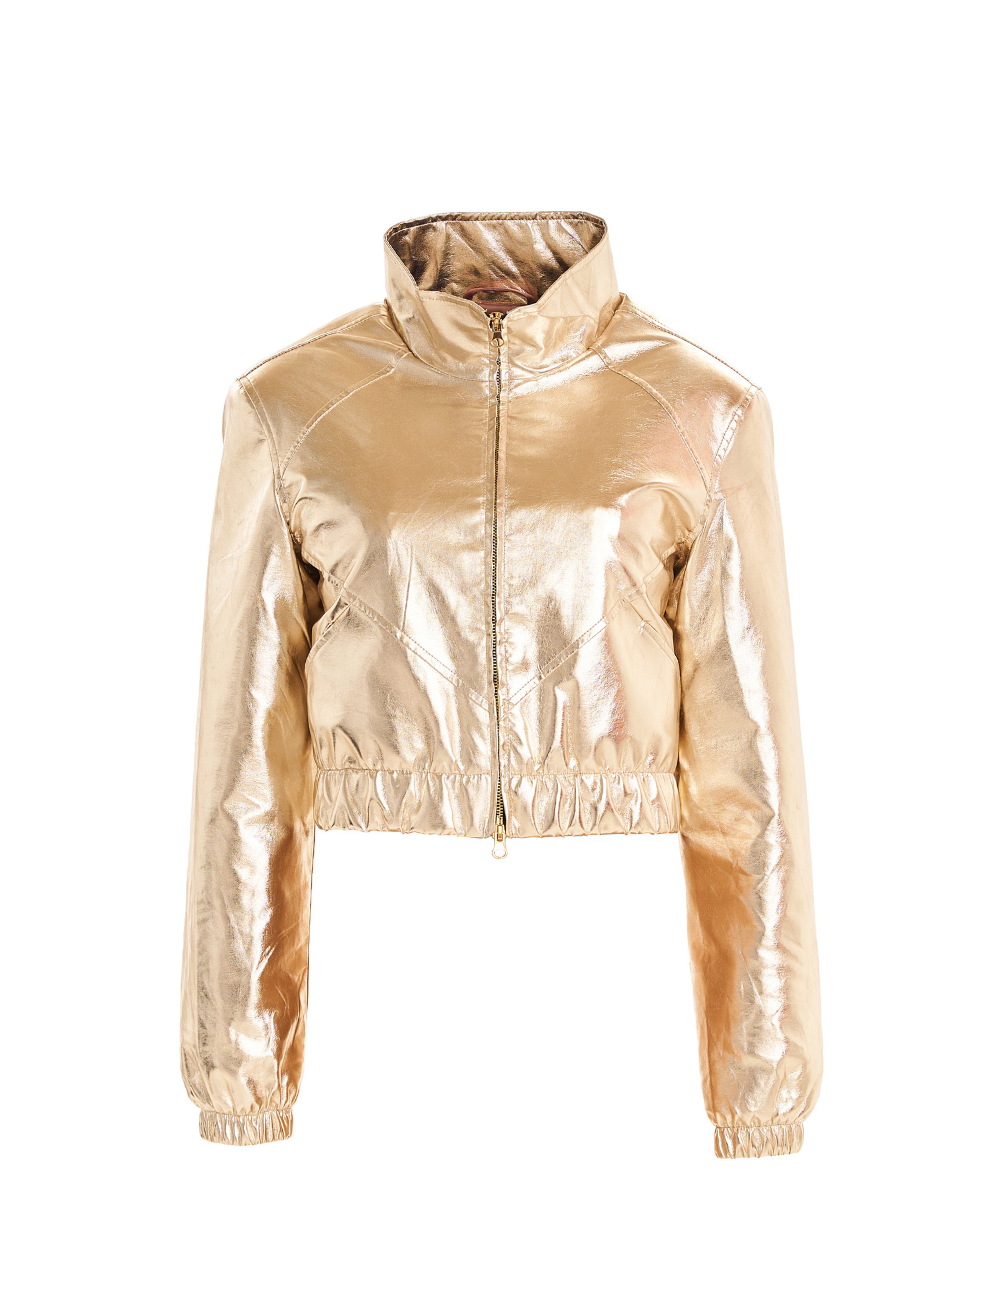 Spring outerwear Shiloh cropped foil gold coat metallic made in canada luxury outerwear animal free leather